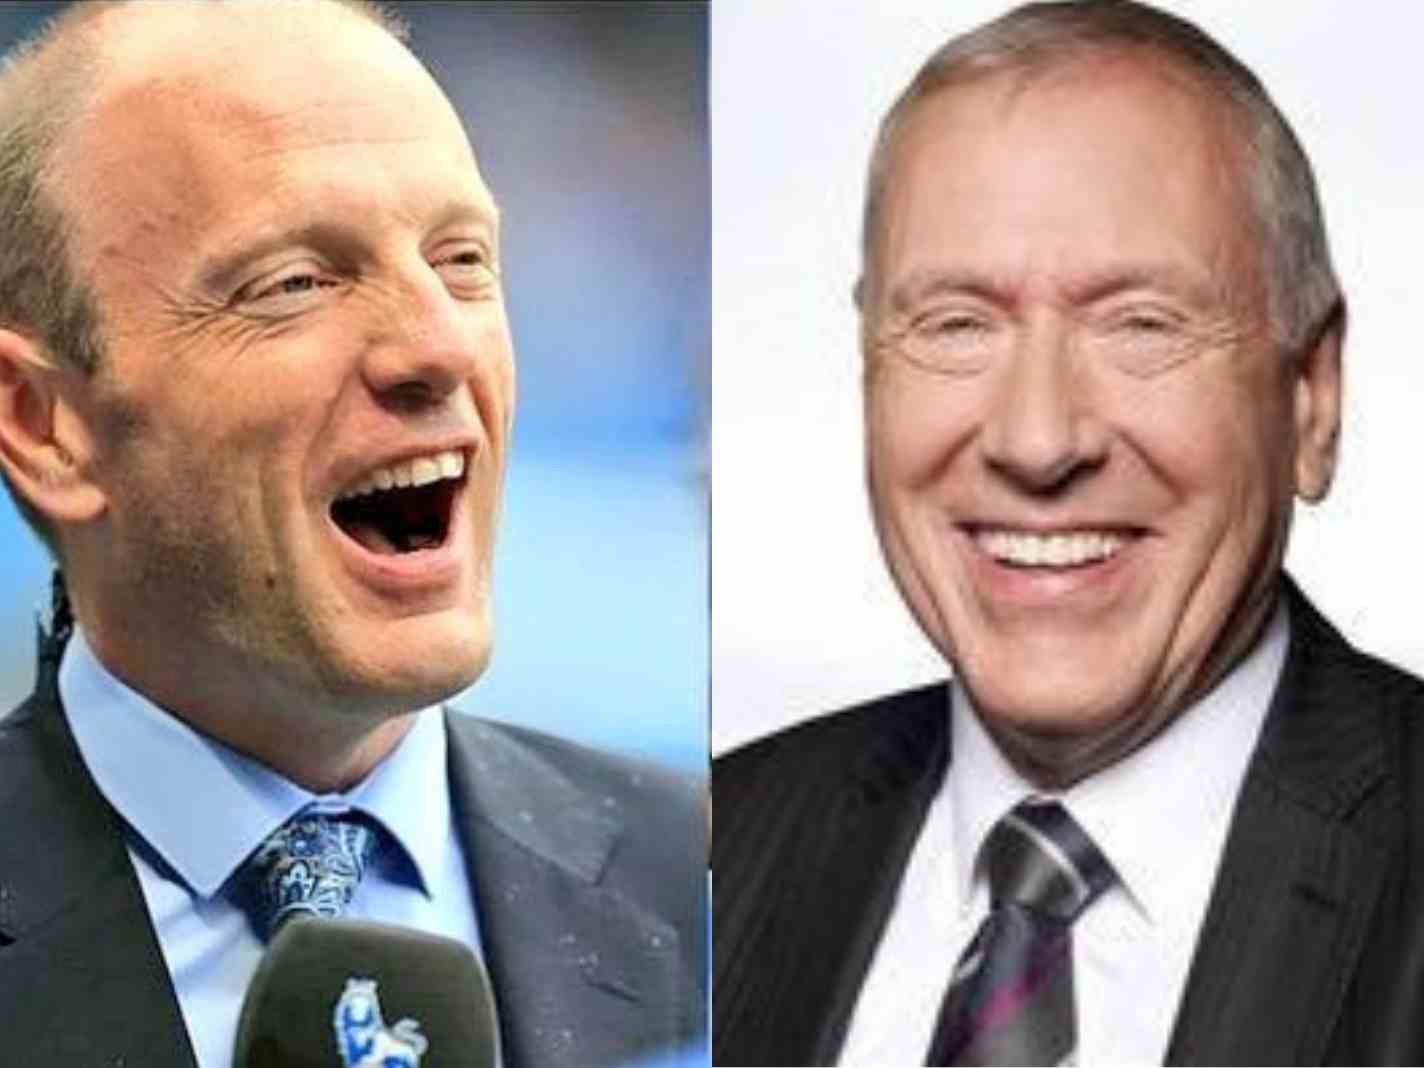 Peter Drury vs Martin Tyler: Who’s the better commentator? Twitter has its say